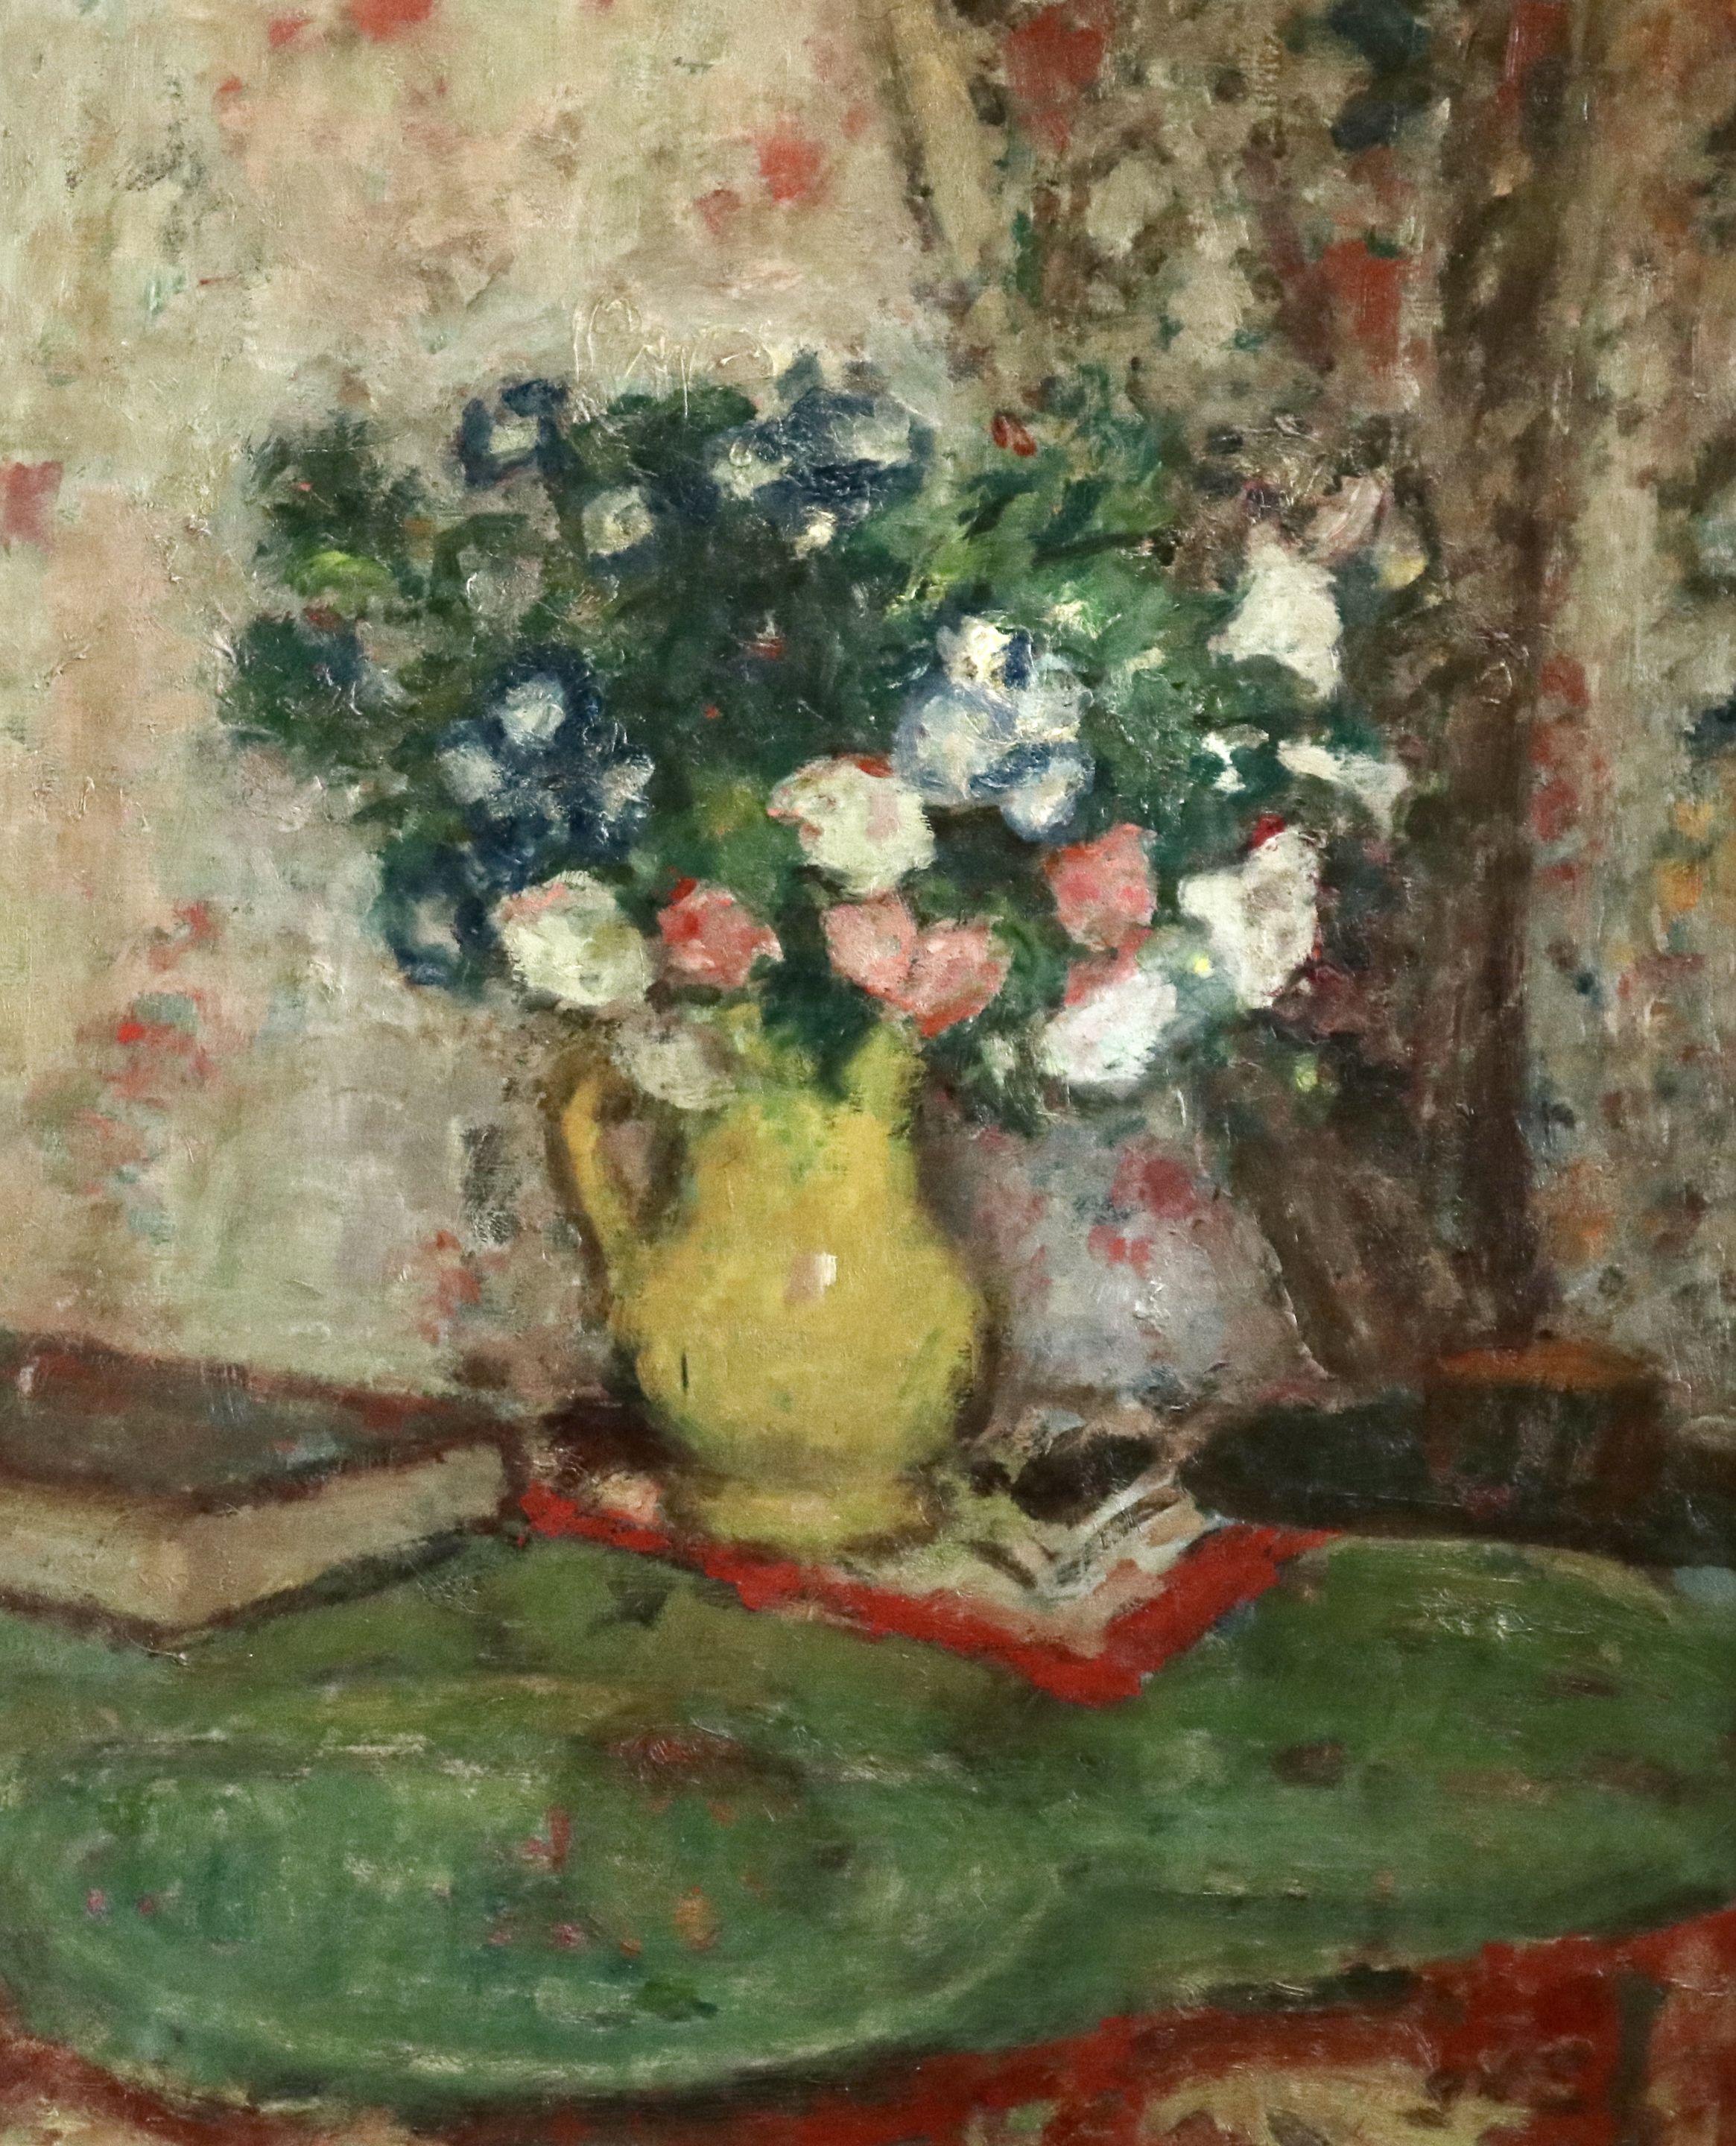 Wonderful still life painting by Georges D'Espagnat of flowers in a yellow jug on a table beside a book. Oil on canvas circa 1930. Signed lower right. Framed dimensions are 32 inches high by 28 inches wide.

From the beginning of his career it was a